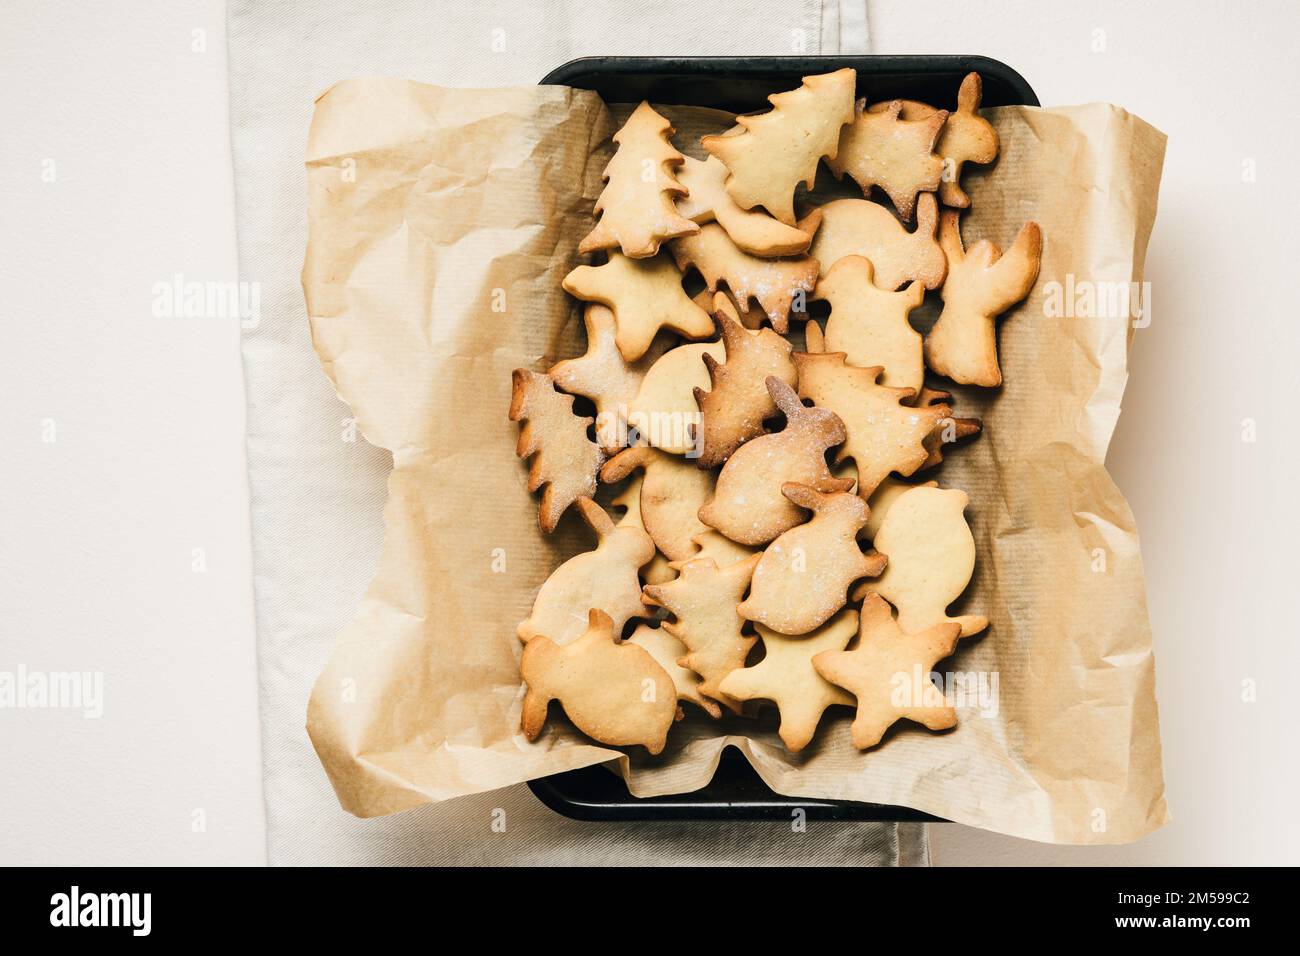 Pile of Christmas-themed gingerbread cookies on baking tray. Stock Photo